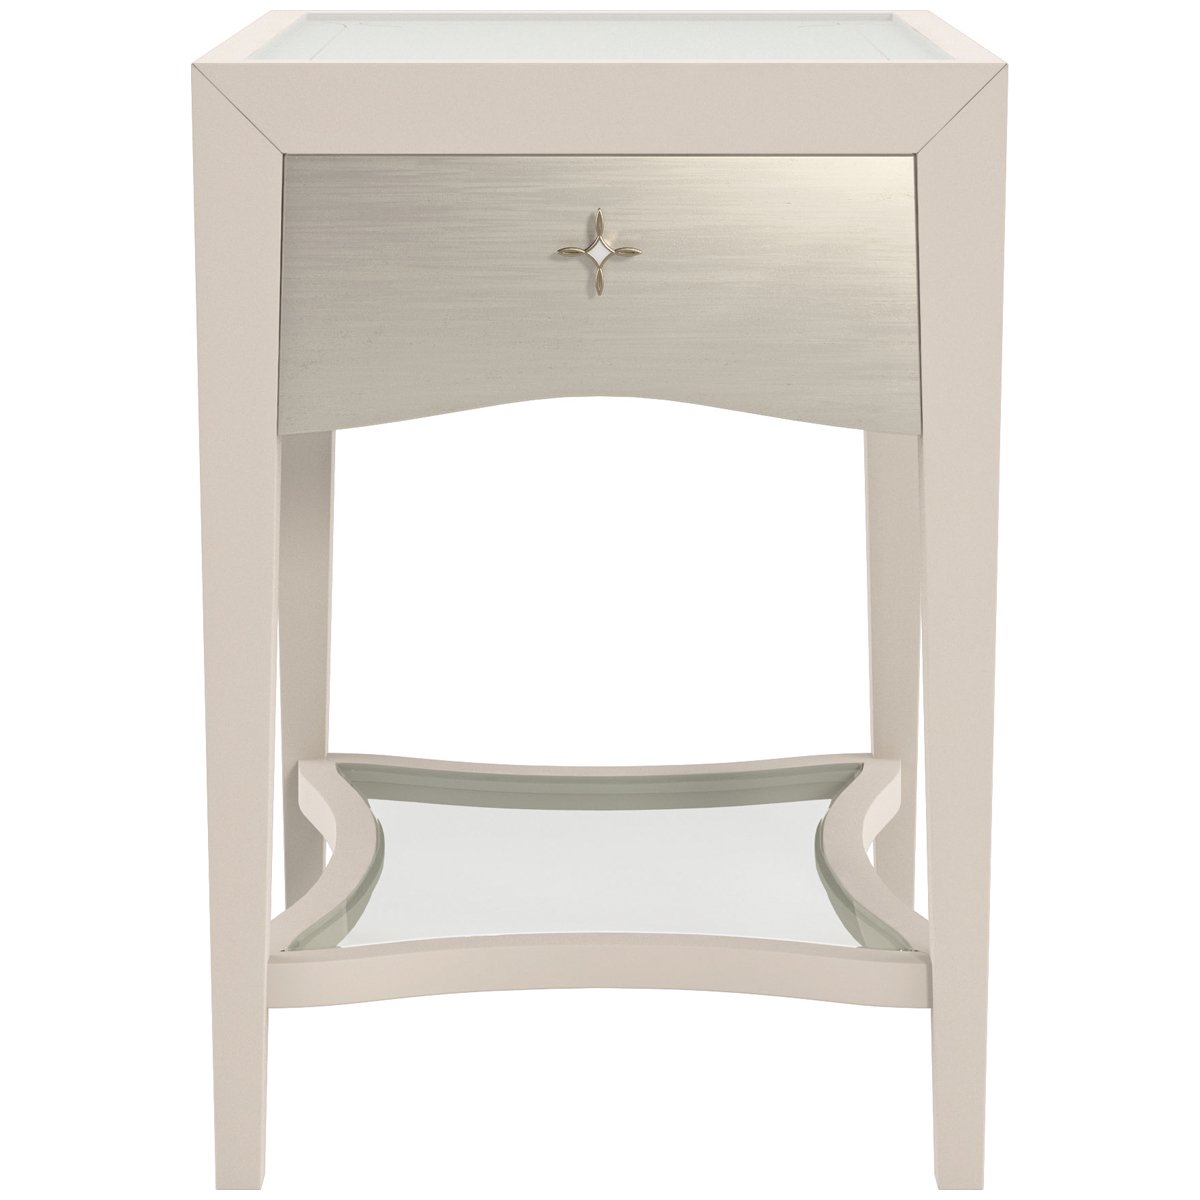 Caracole Classic Little Charm Table